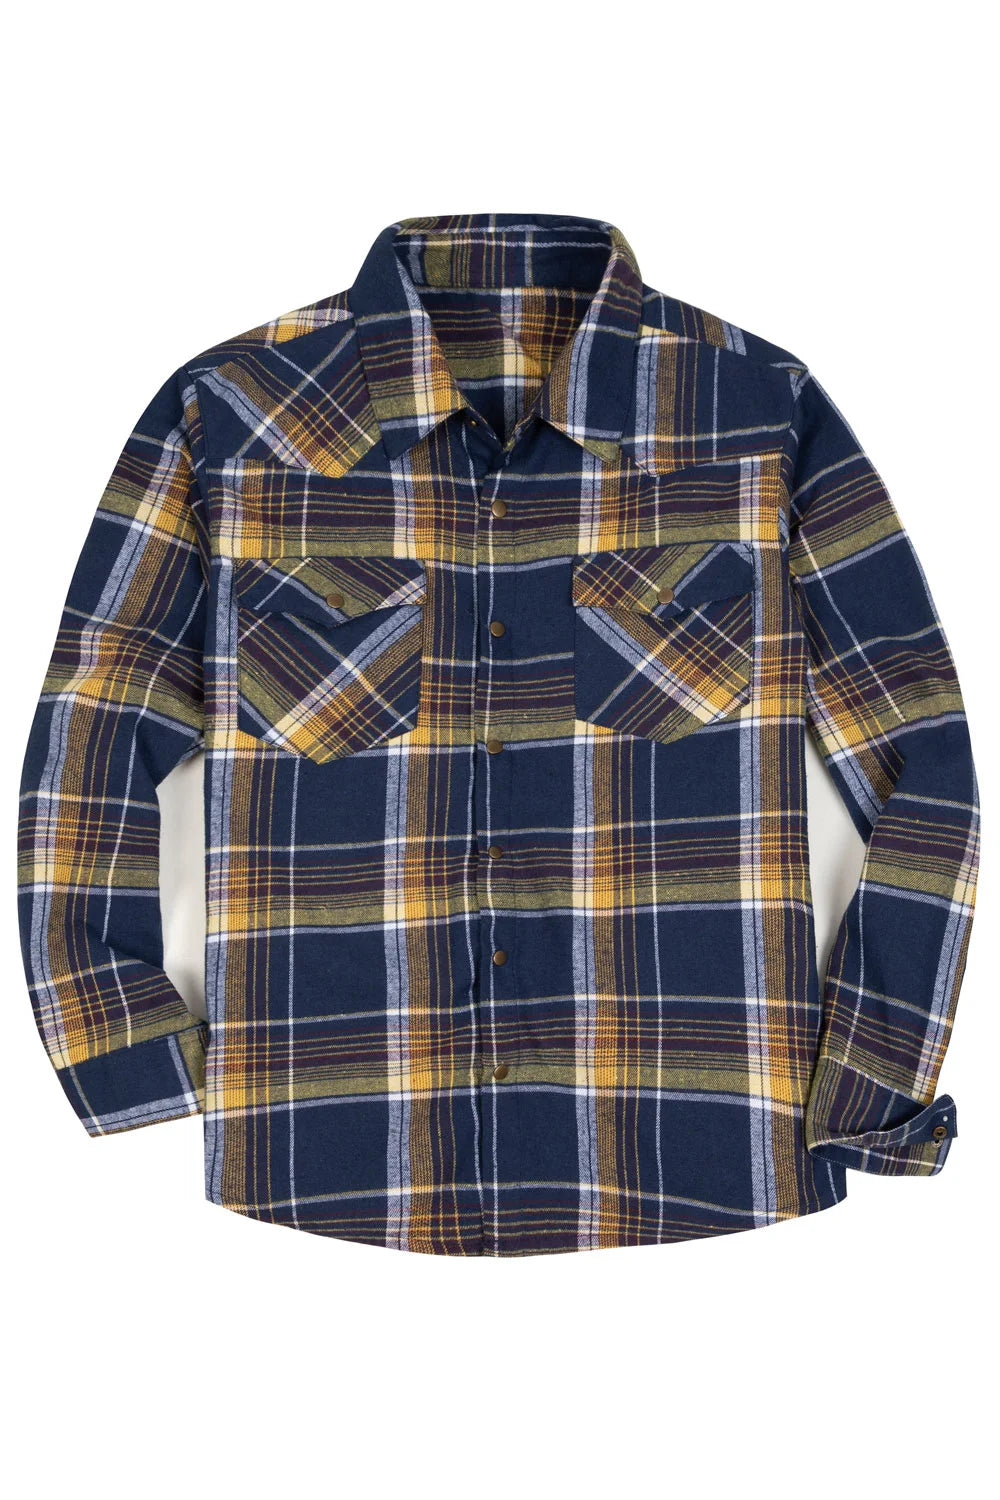 Men's Snap Front Long Sleeve Plaid Western Flannel Shirt#N# – FlannelGo